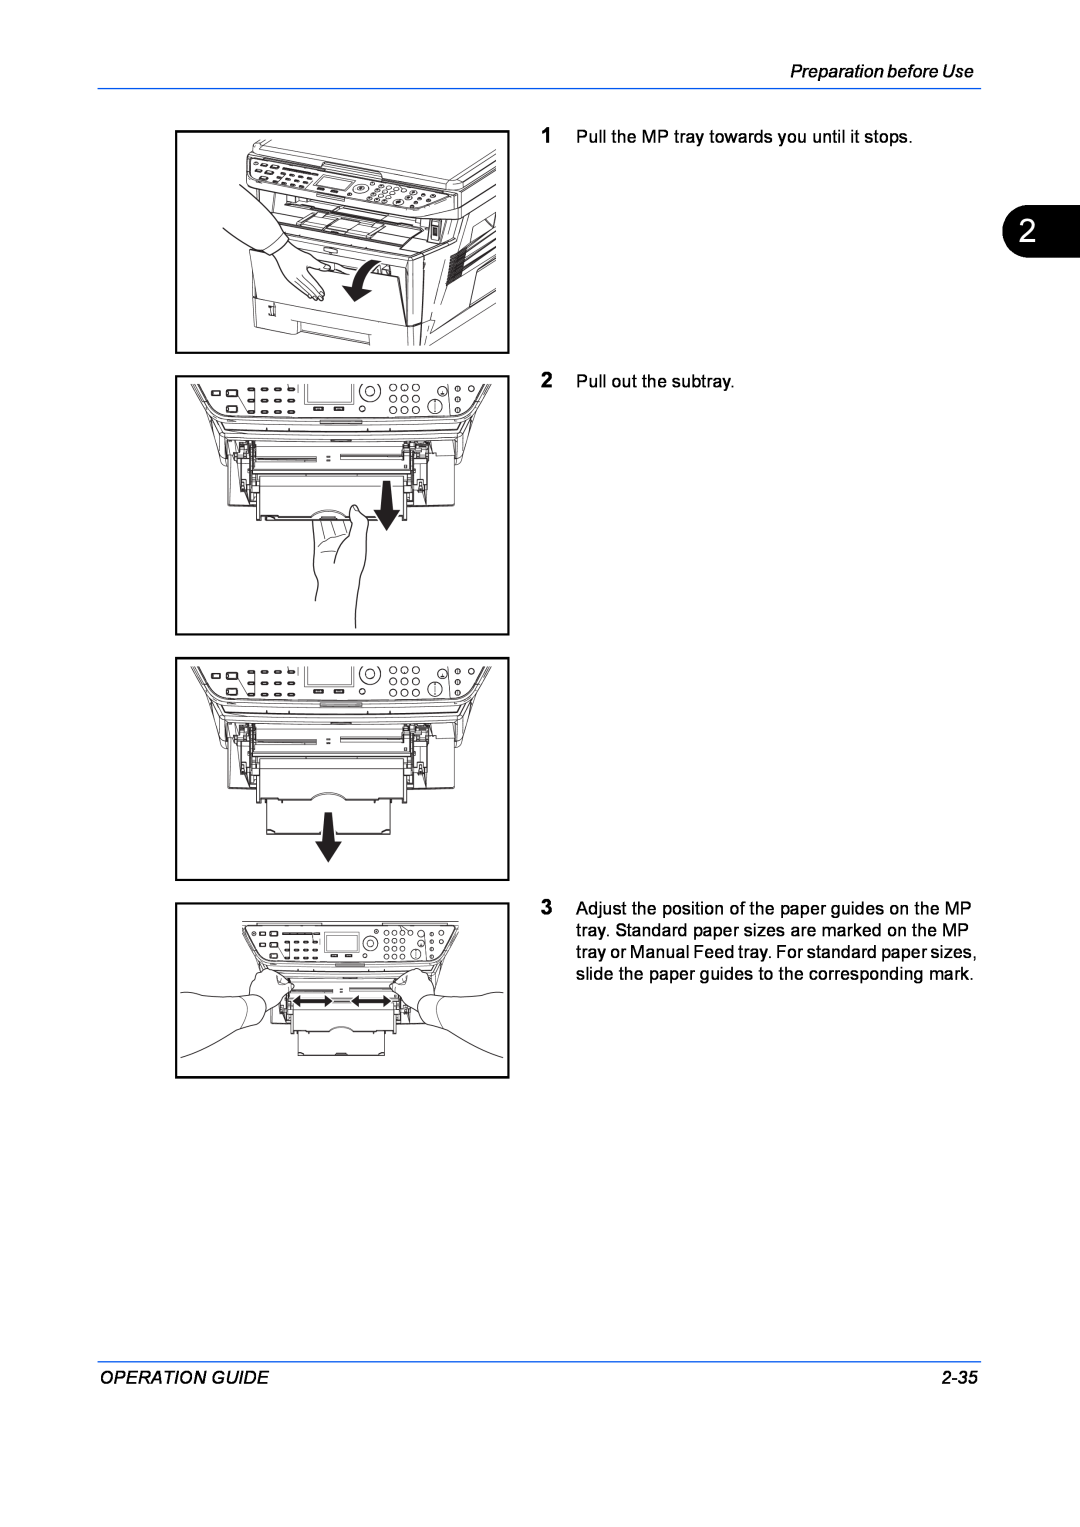 Kyocera FS-1128MFP manual Preparation before Use, Pull the MP tray towards you until it stops, Pull out the subtray, 2-35 